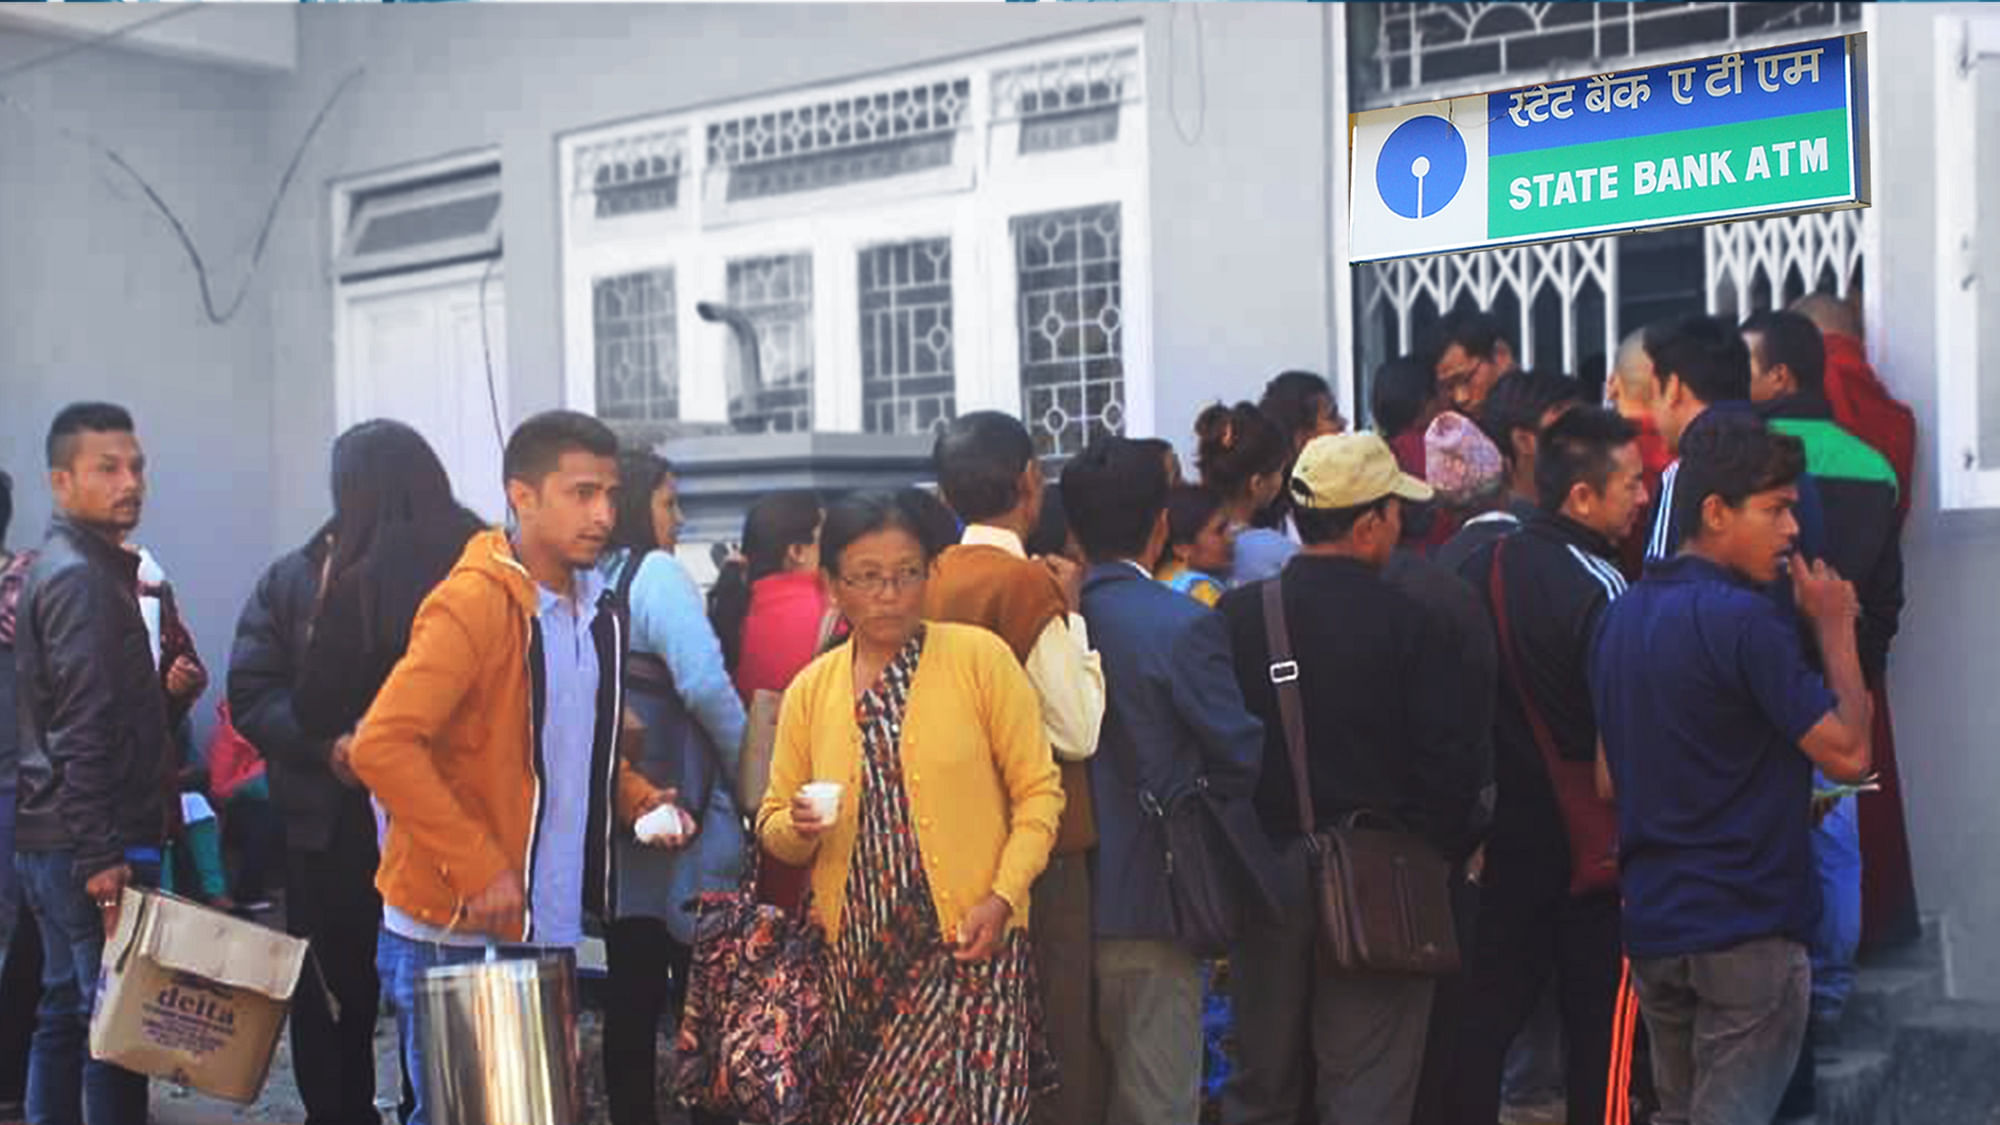 Residents of Darjeeling line up outside ATMs to withdraw money, but not without a little help from complete strangers. (Photo: Darjeeling Chronicles)